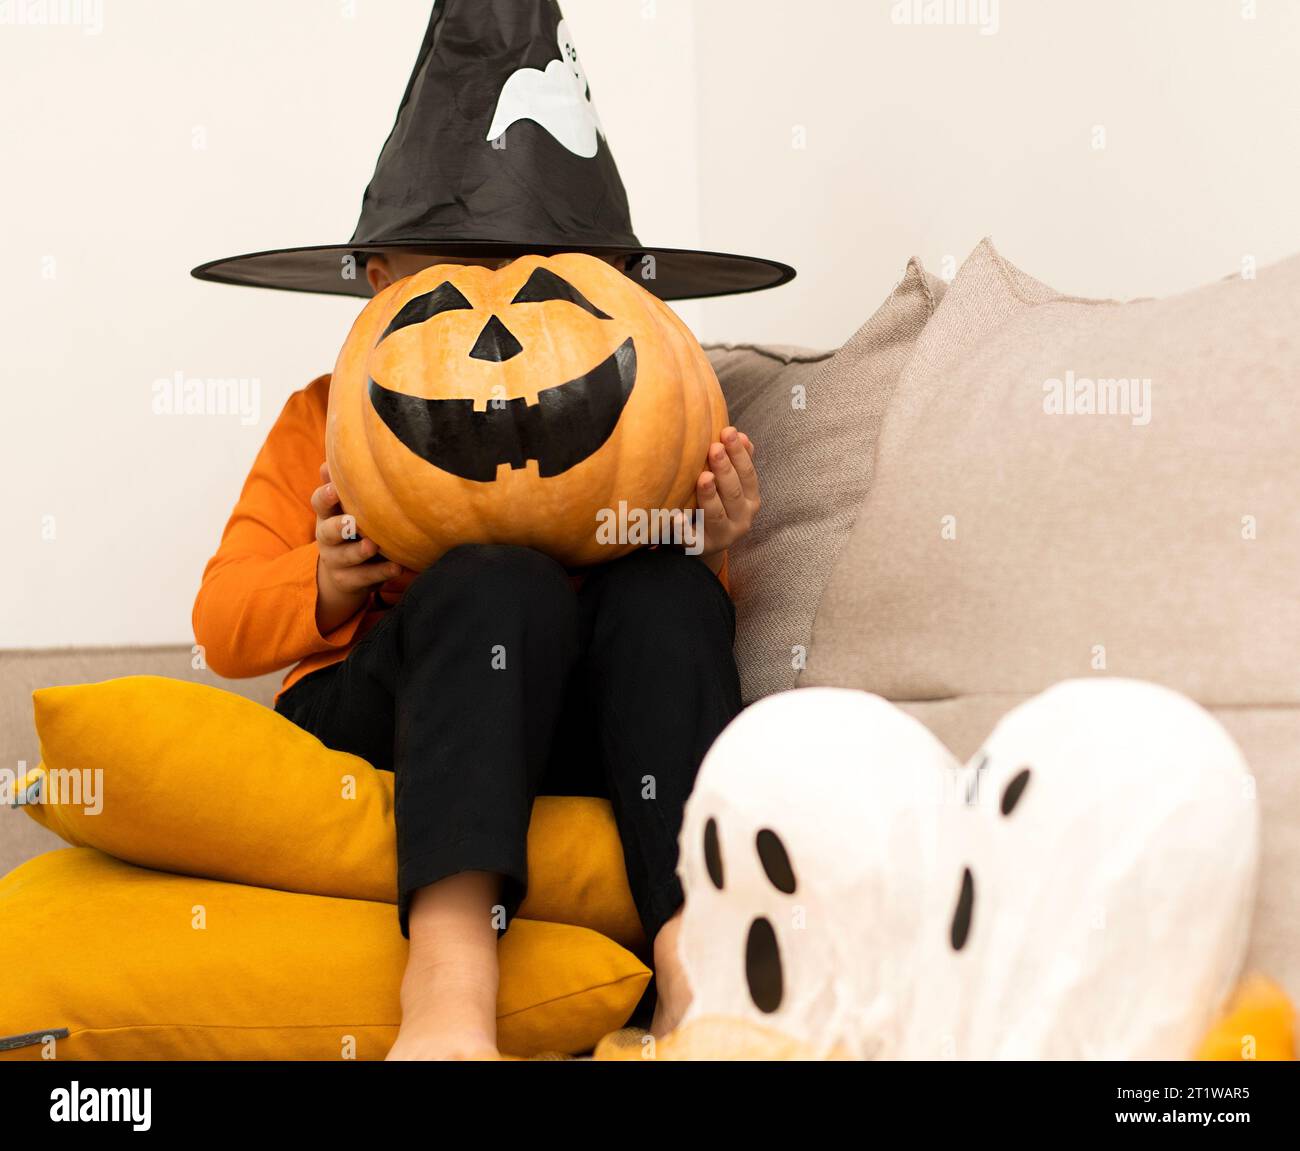 Halloween. Concept. A boy in an orange sweater and a haunted wizard's hat, with a pumpkin instead of a face, sits cheerfully in a home interior. Close Stock Photo